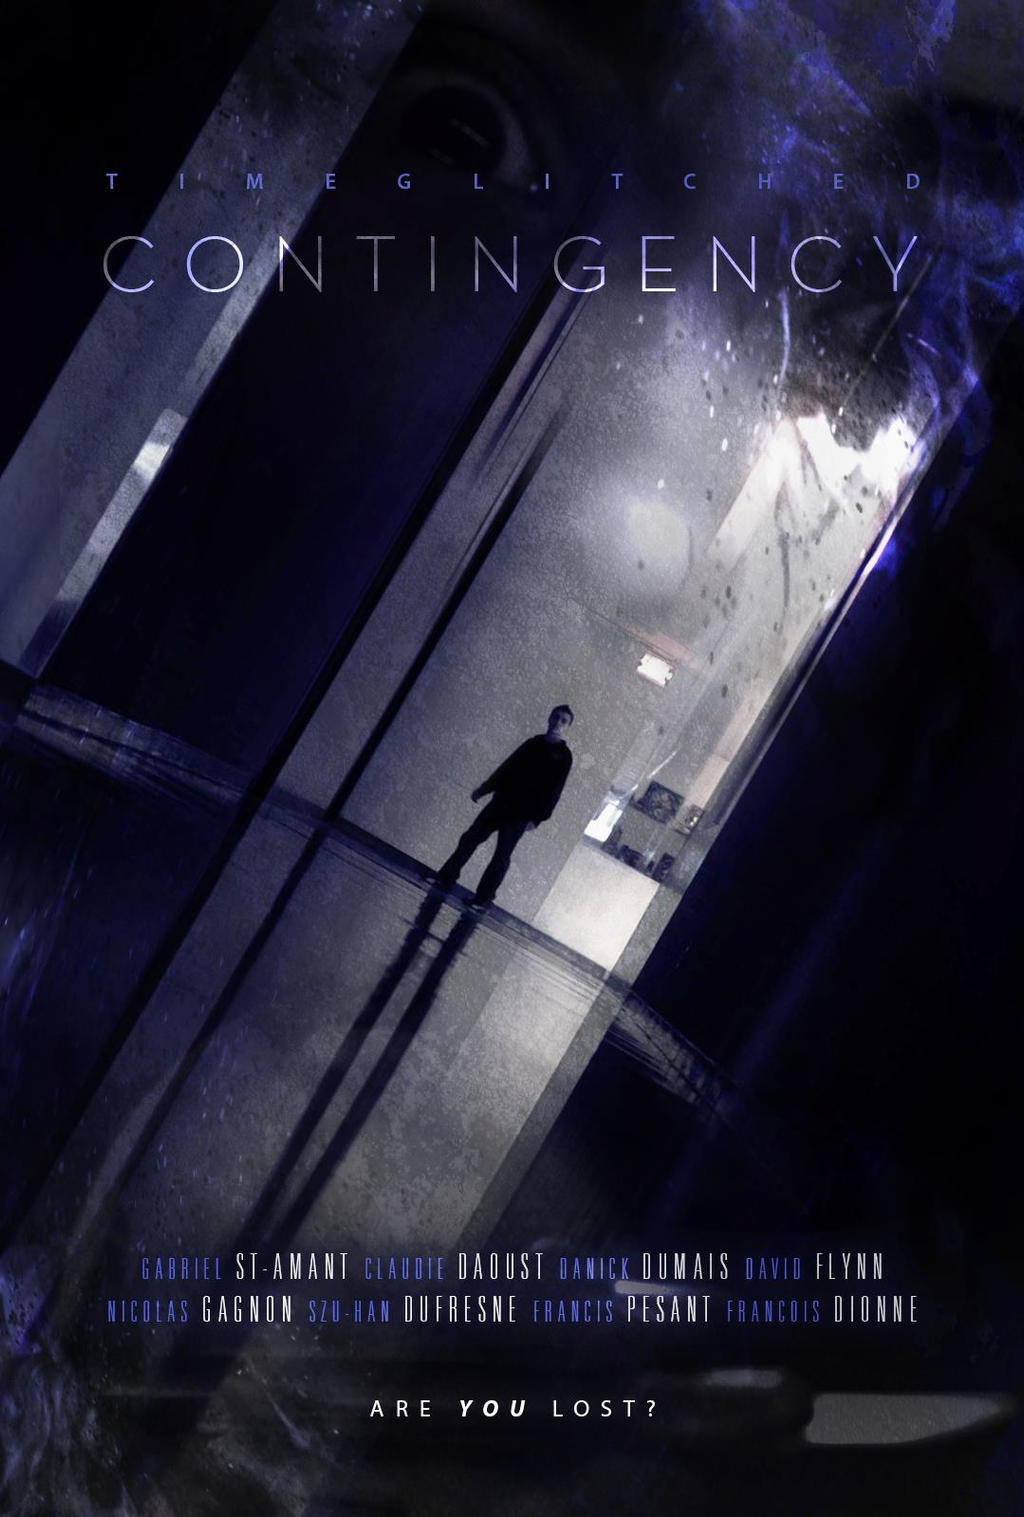 CONTINGENCY - Sci-Fi Thriller Poster